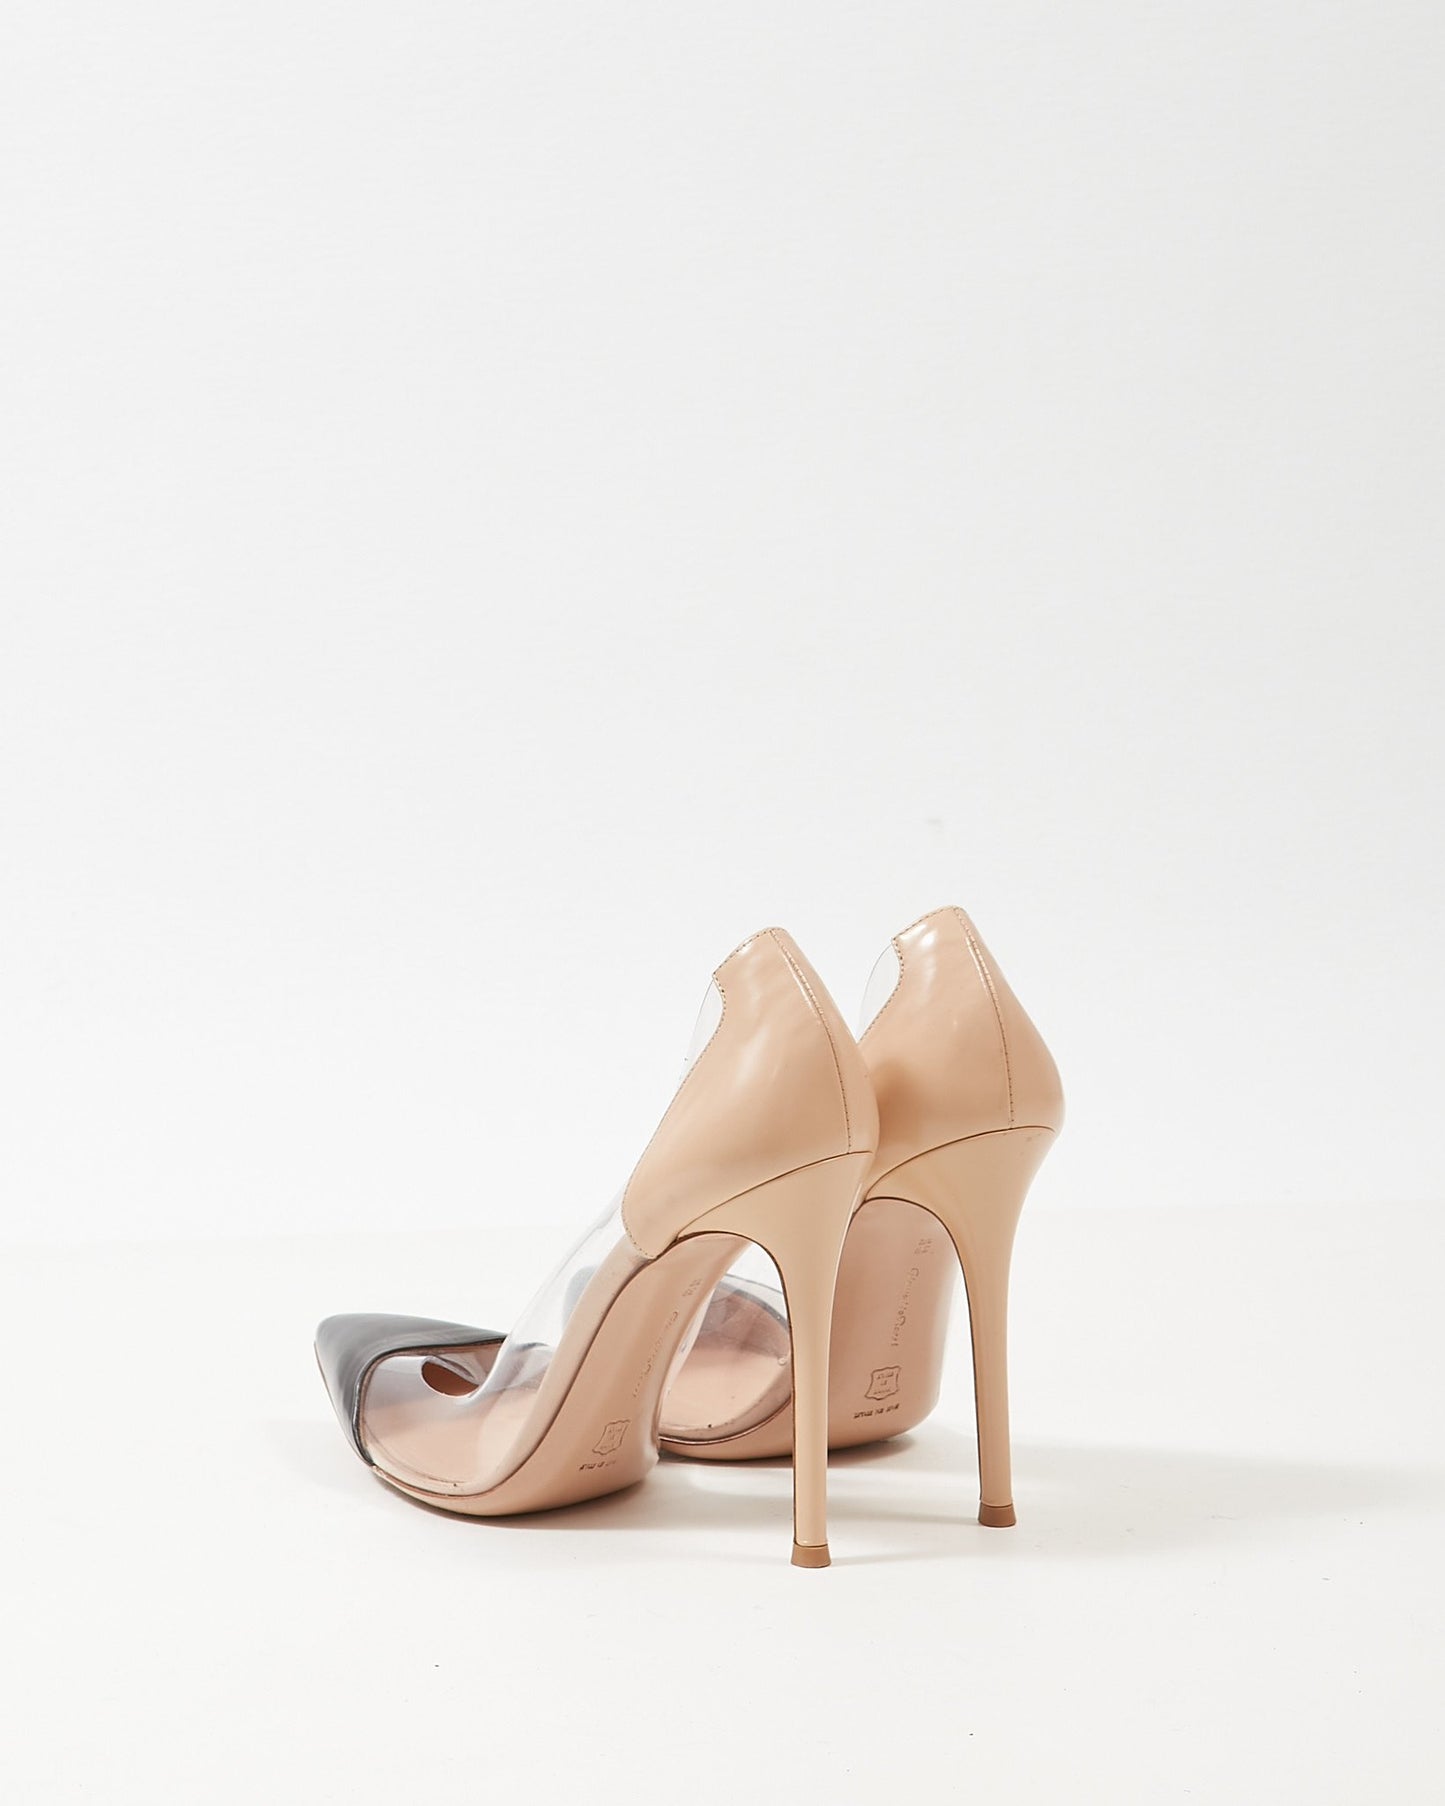 Gianvito Rossi Beige Leather and Plexi Pointed Toe 105mm Pumps - 39.5